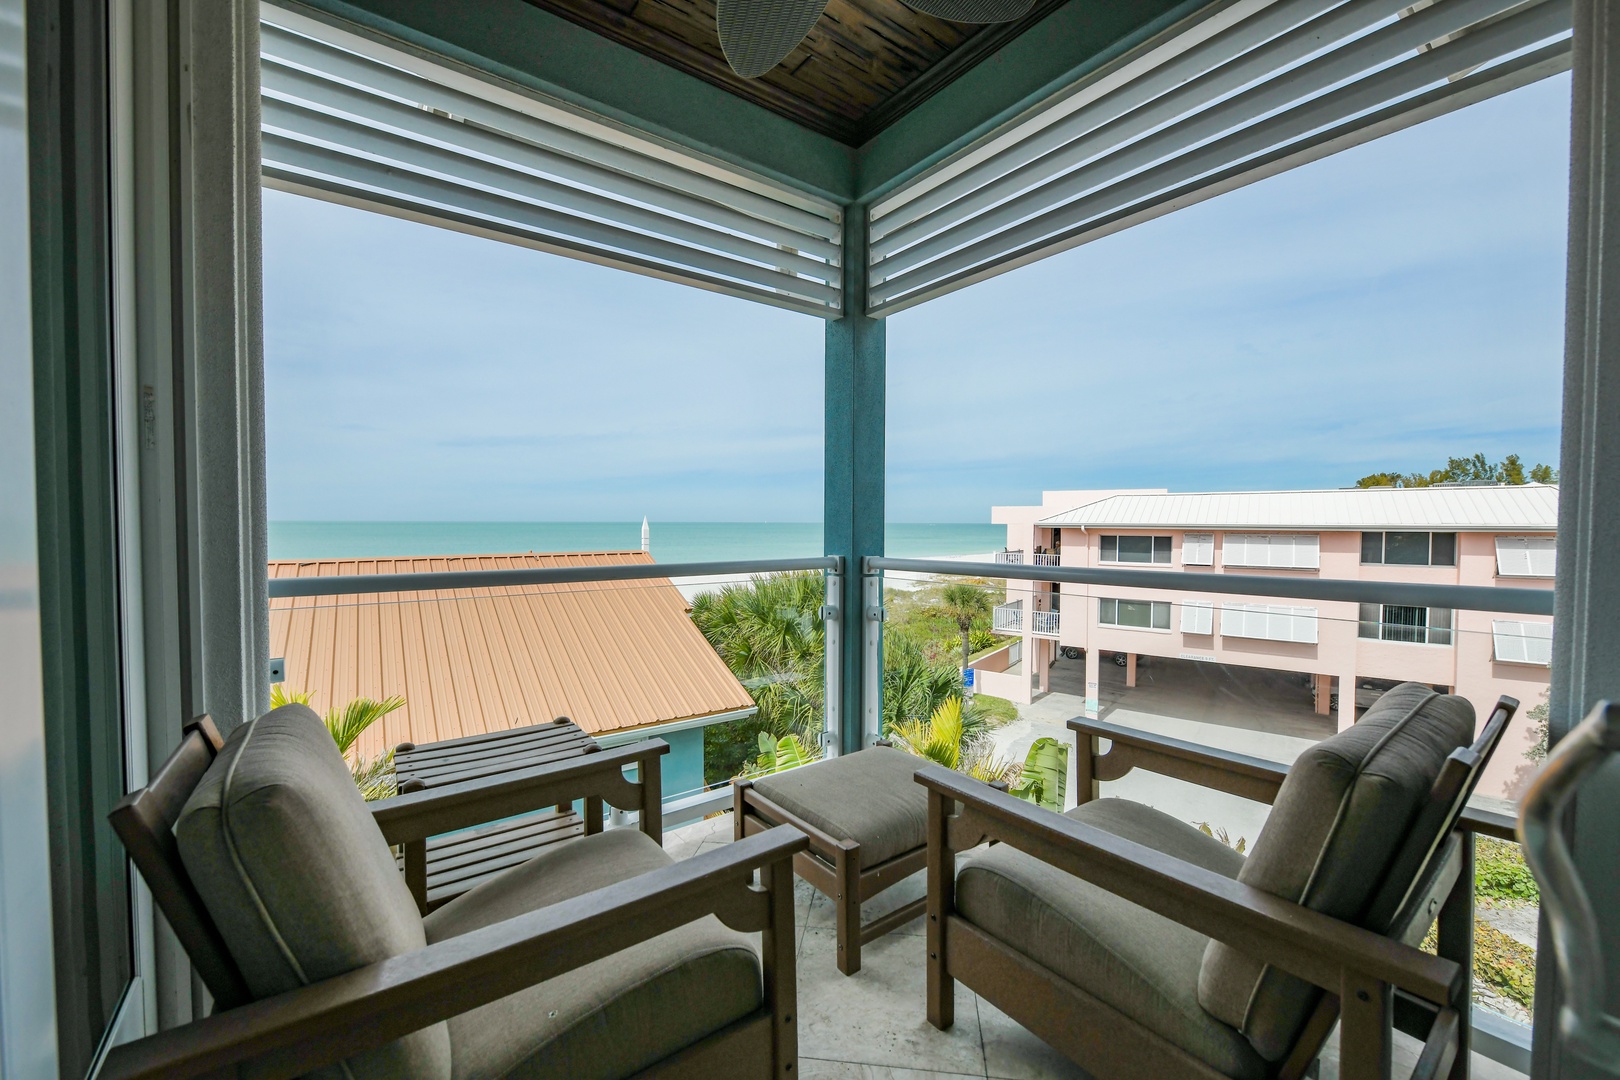 Side A - Top Floor - Balcony - Views of Gulf Beaches